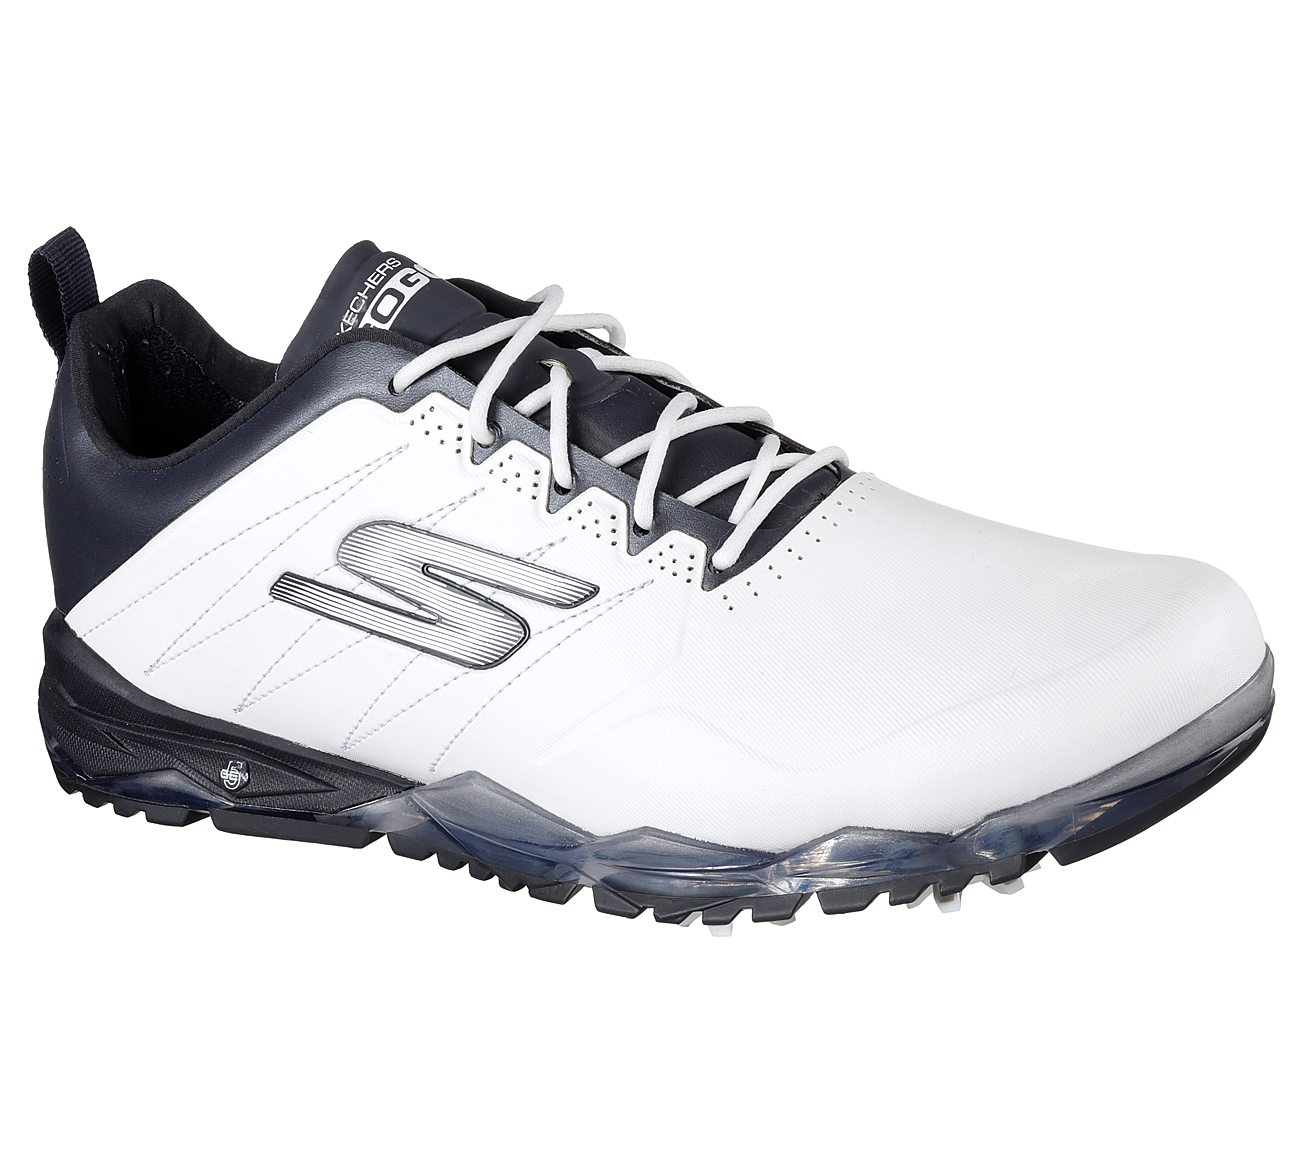 Skechers launch 2018 Mens Golf Shoe Collection | Golf ...